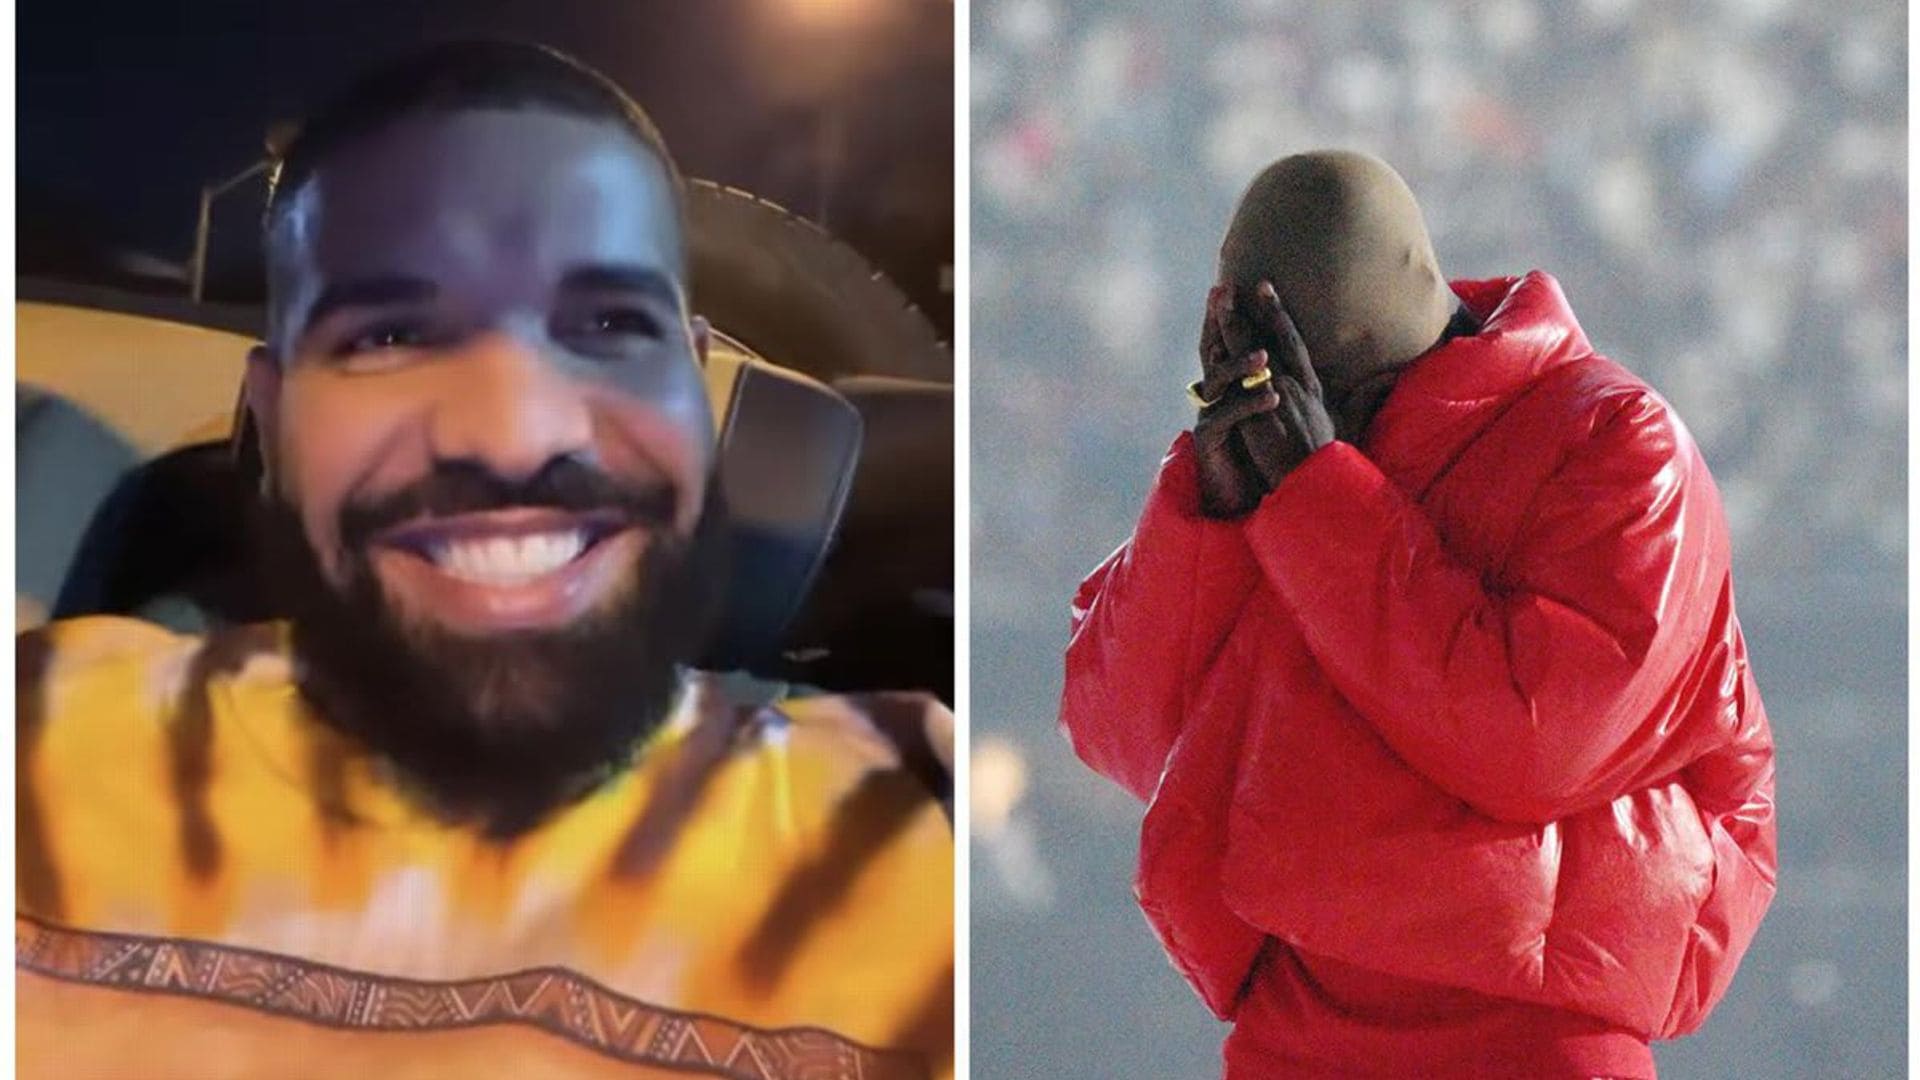 Drake laughs after finding out Kanye West ‘leaked’ his address - here’s why they’re fighting again